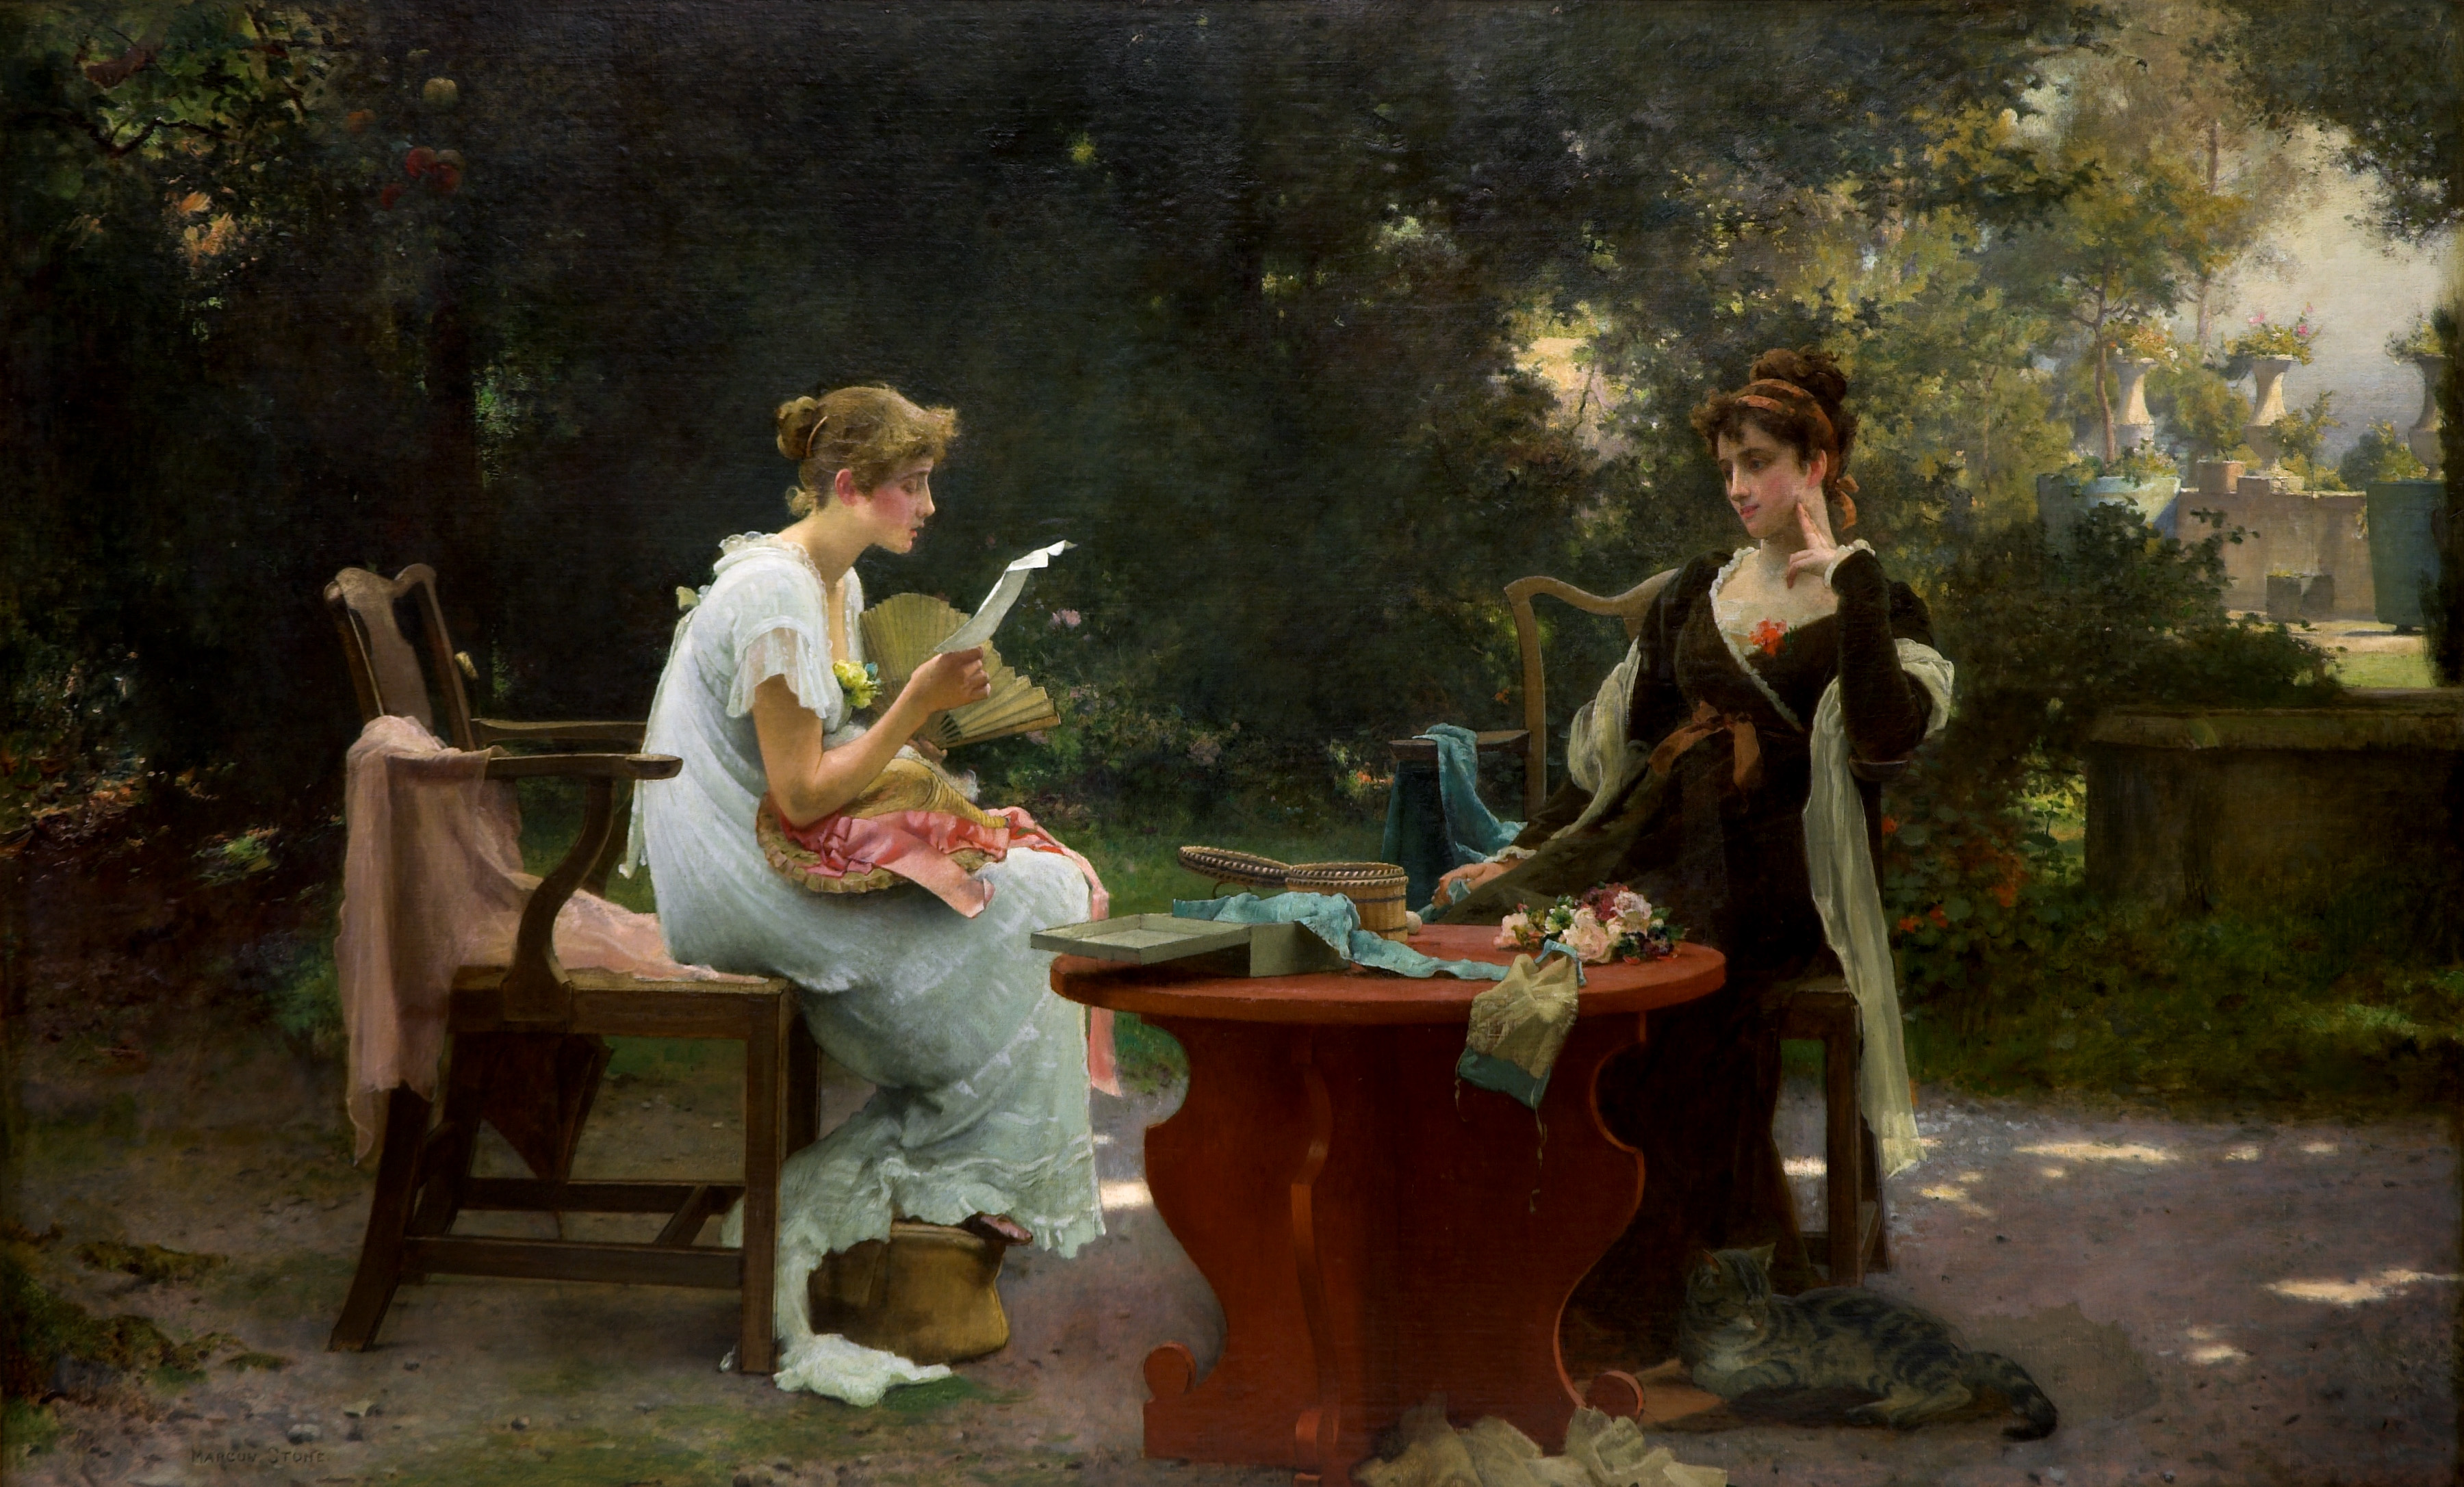 <p><strong>Marcus Stone,&nbsp;</strong><em>Her First Love Letter</em>,&nbsp;1889, oil on canvas. Auckland Art Gallery, gift of Moss Davis, 1930</p>
